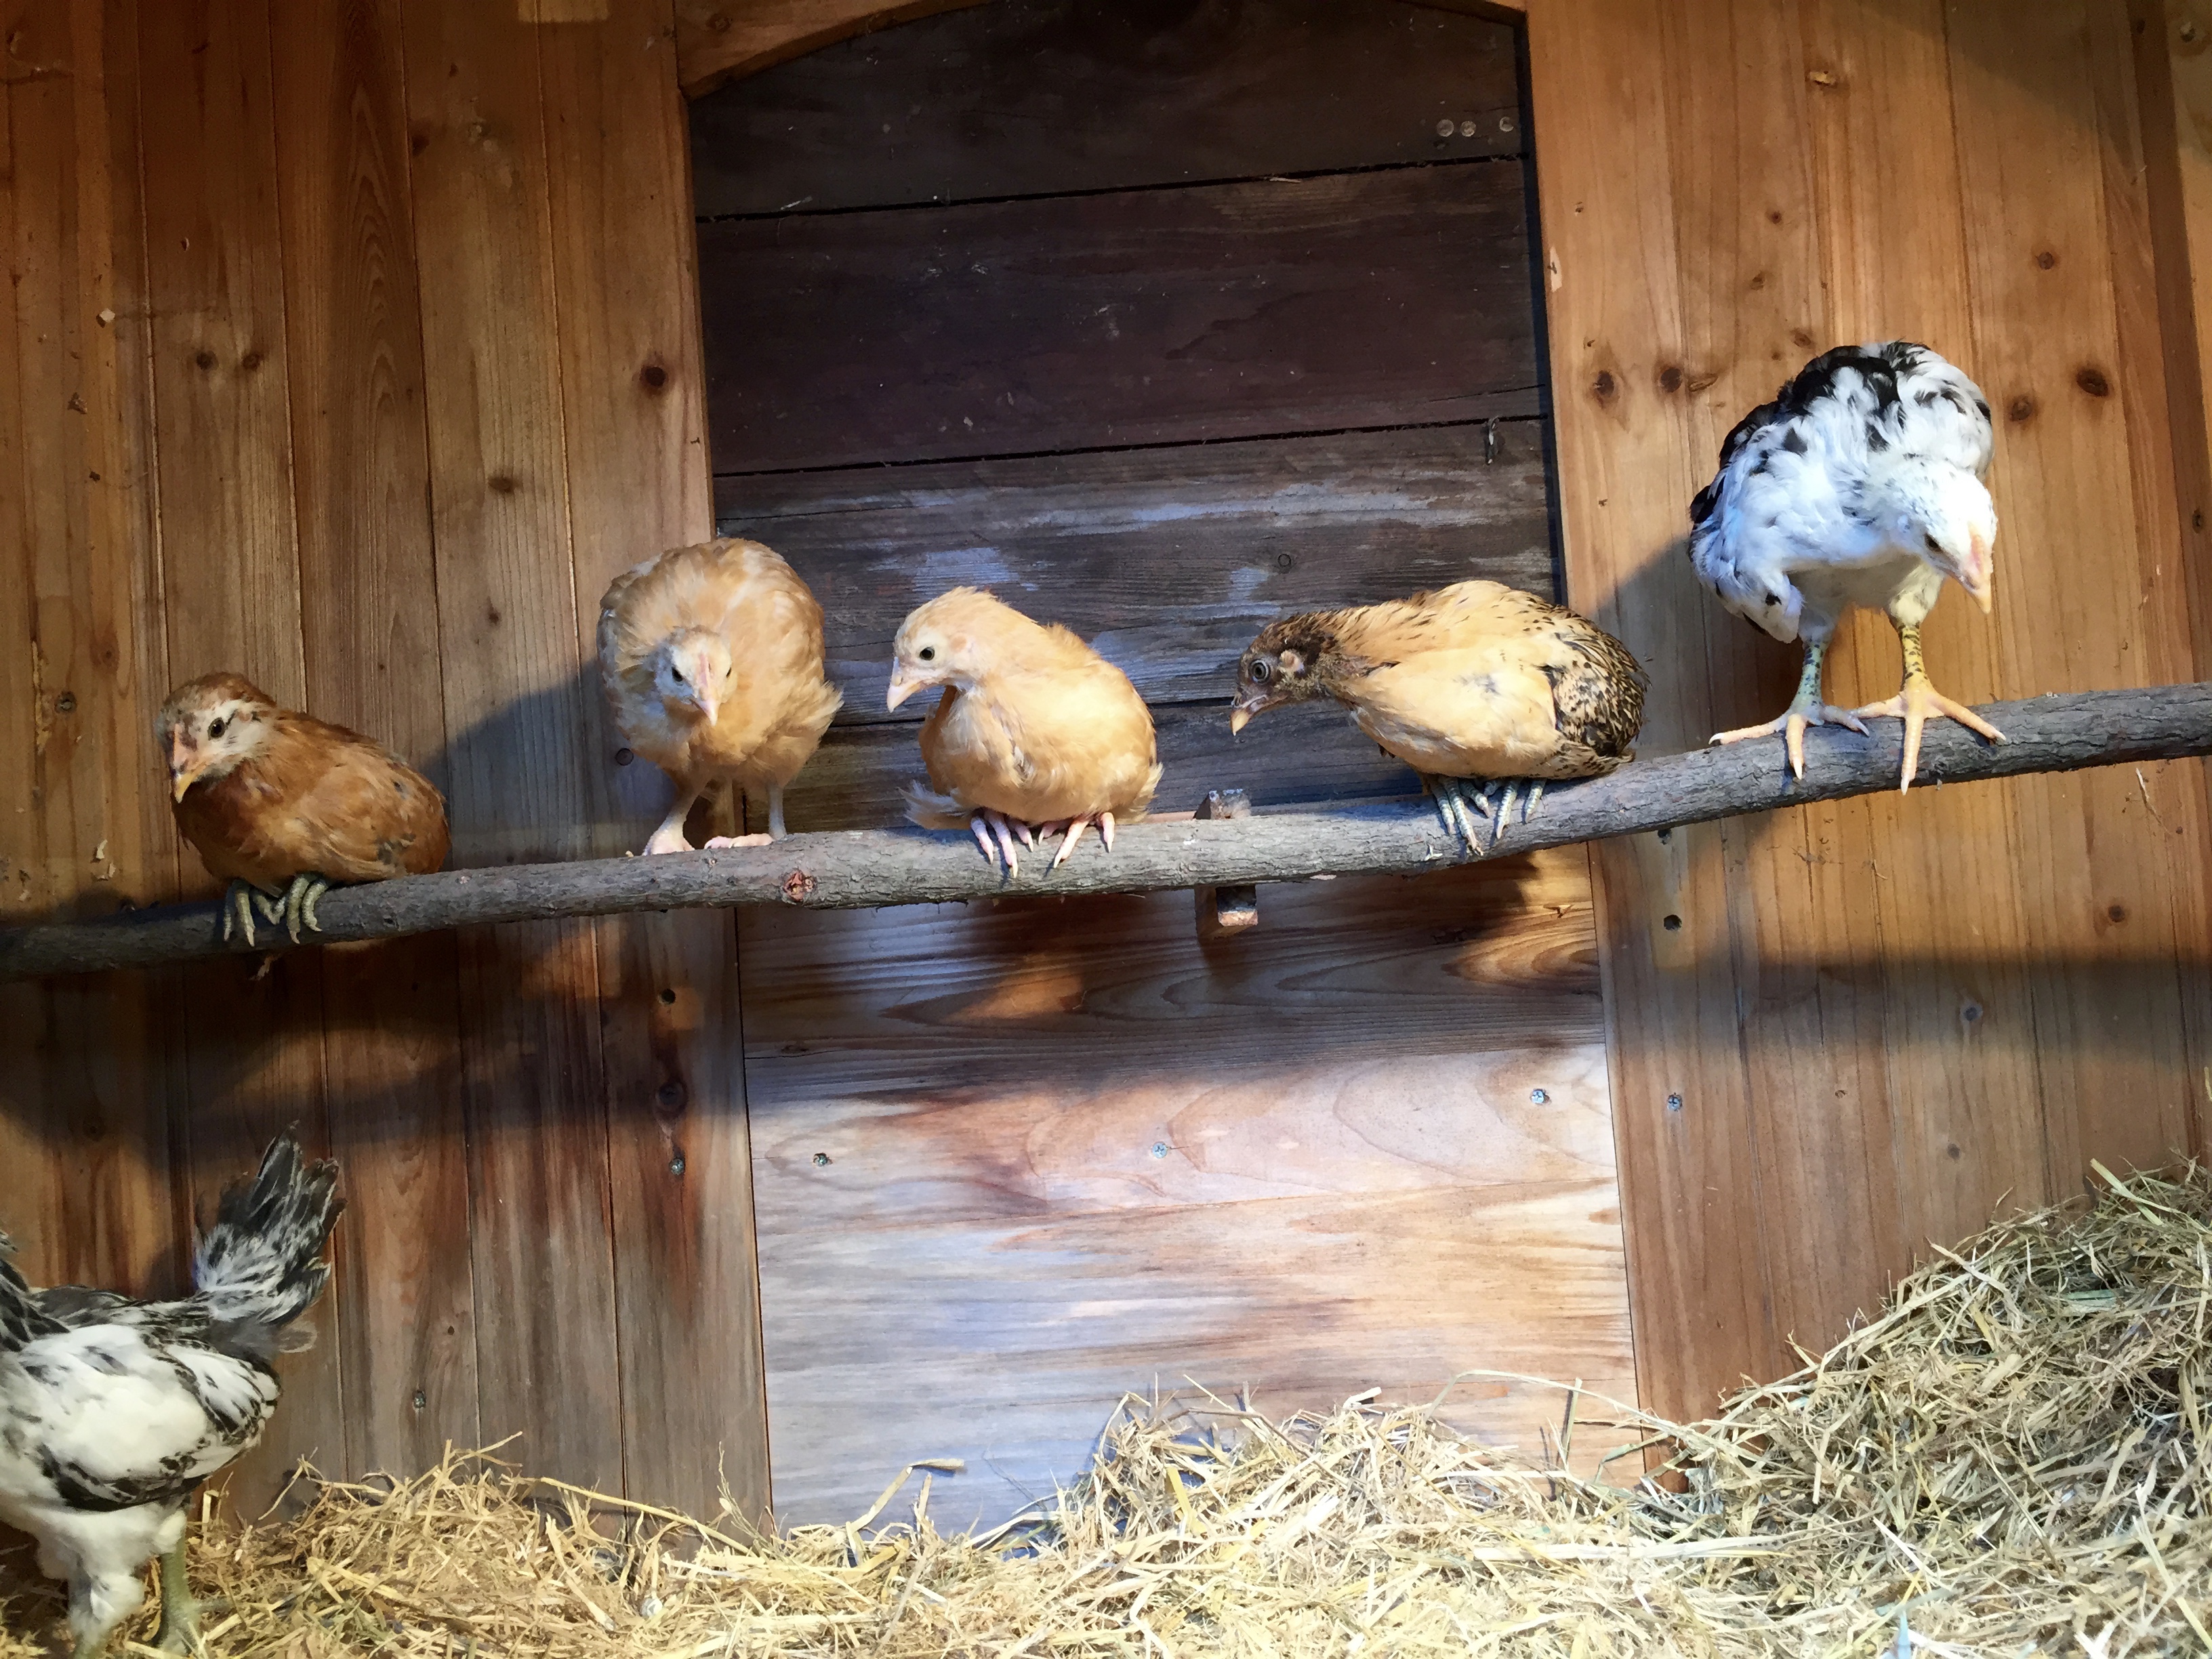 I had to place the chickens on their roost... after the photo, they all slept under the water bucket until they were older.